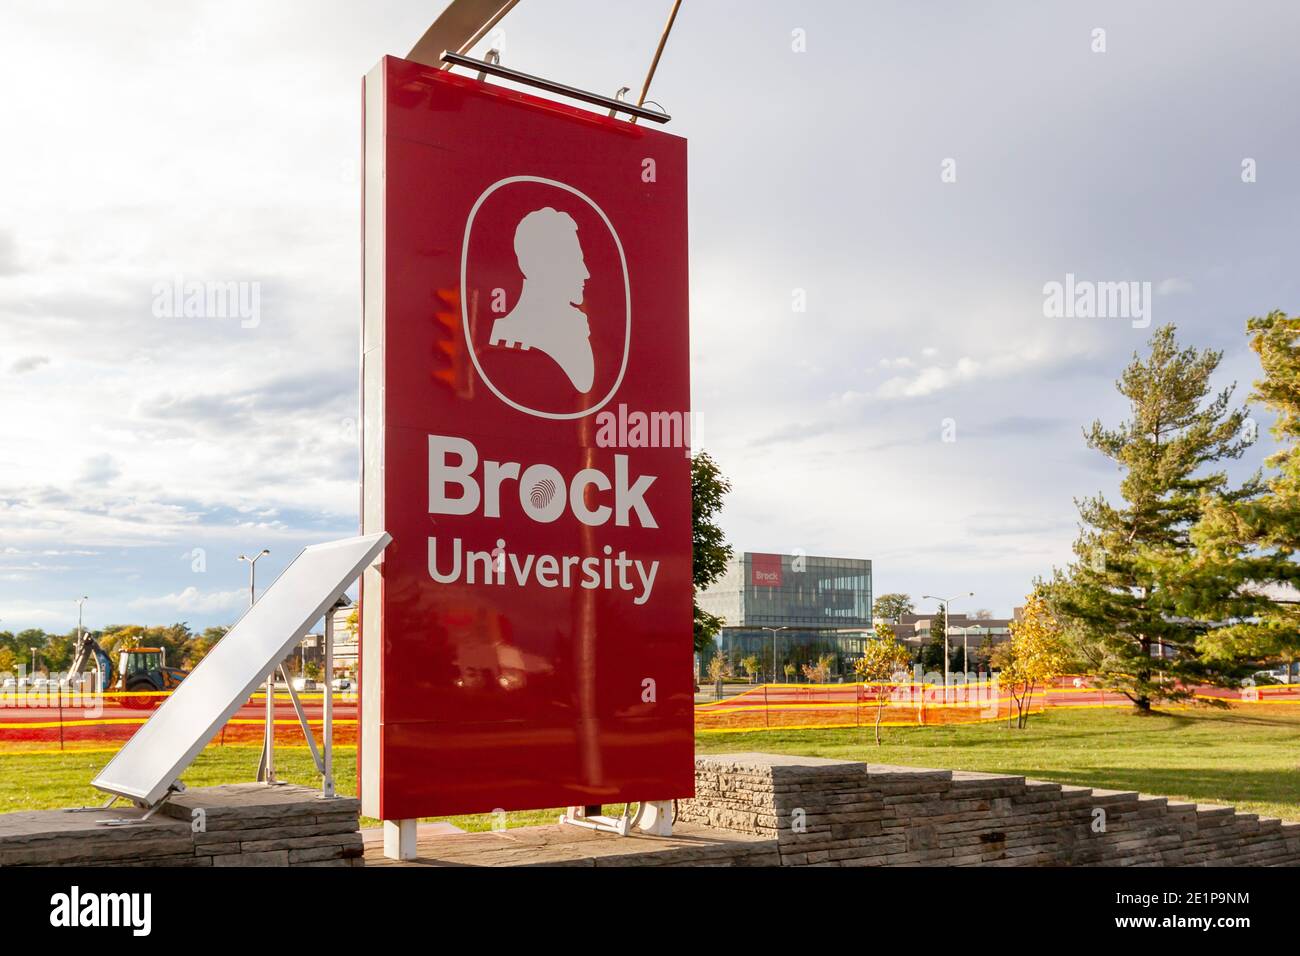 St. Catharines, On, Canada - October 1, 2020: Brock University sign is seen in St. Catharines, On, Canada on October 1, 2020. Stock Photo